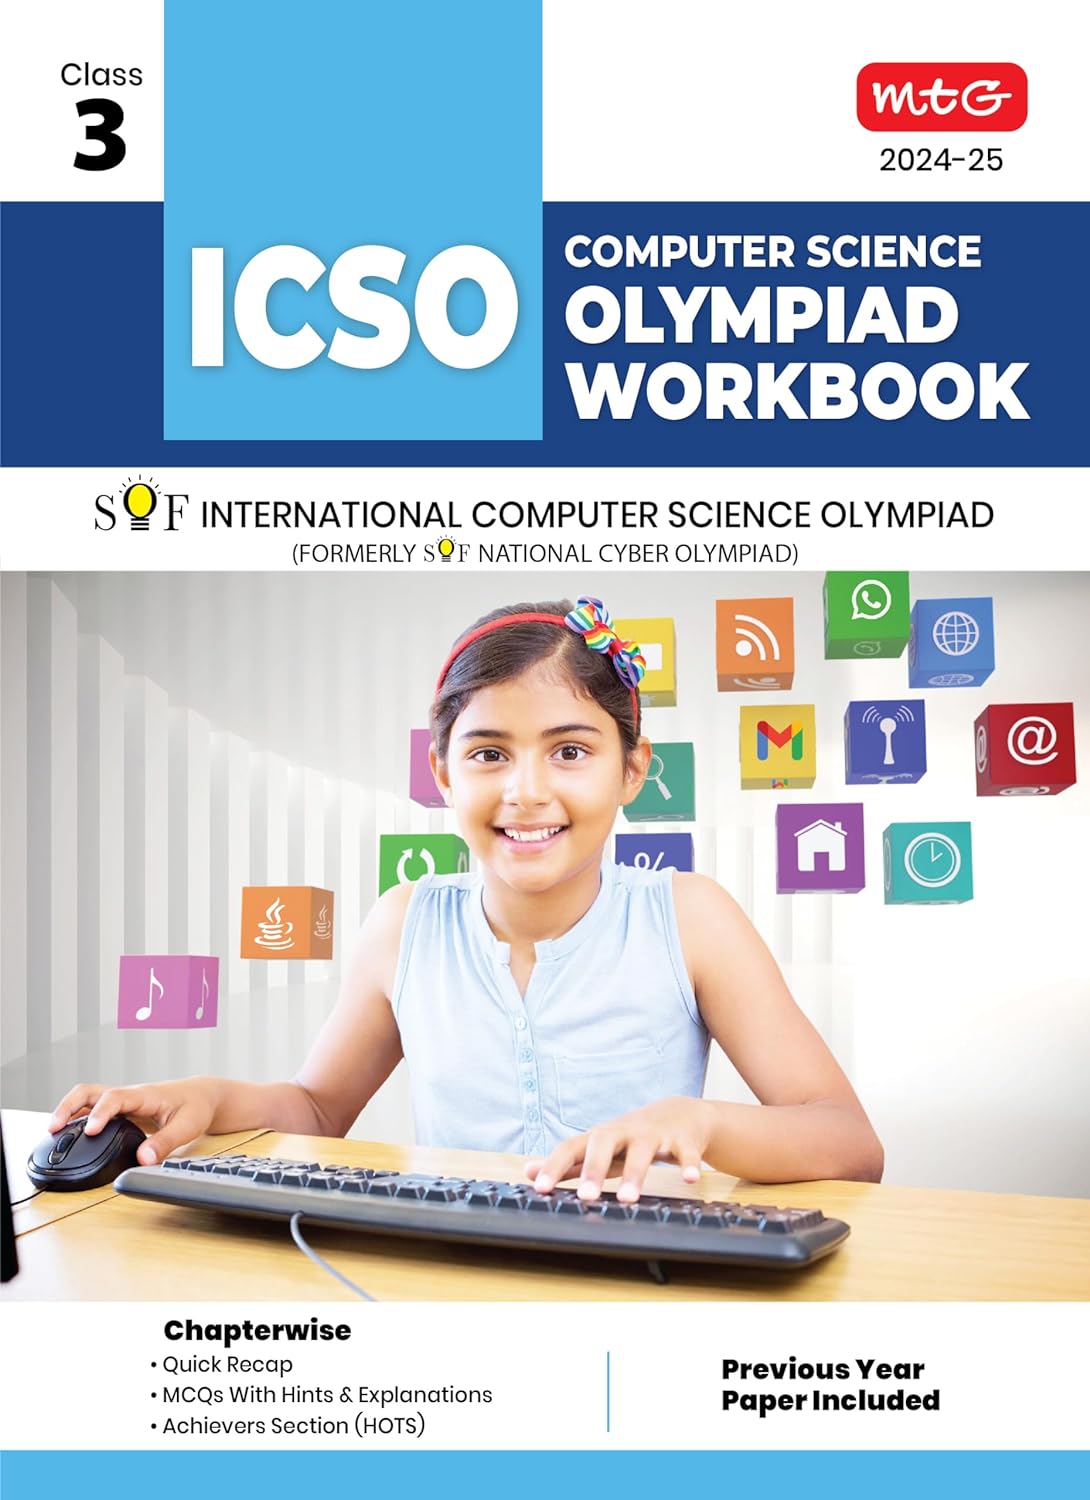 MTG Olympiad ICSO Computer Science Workbook For Class 3 - Latest for 2024-25 Session